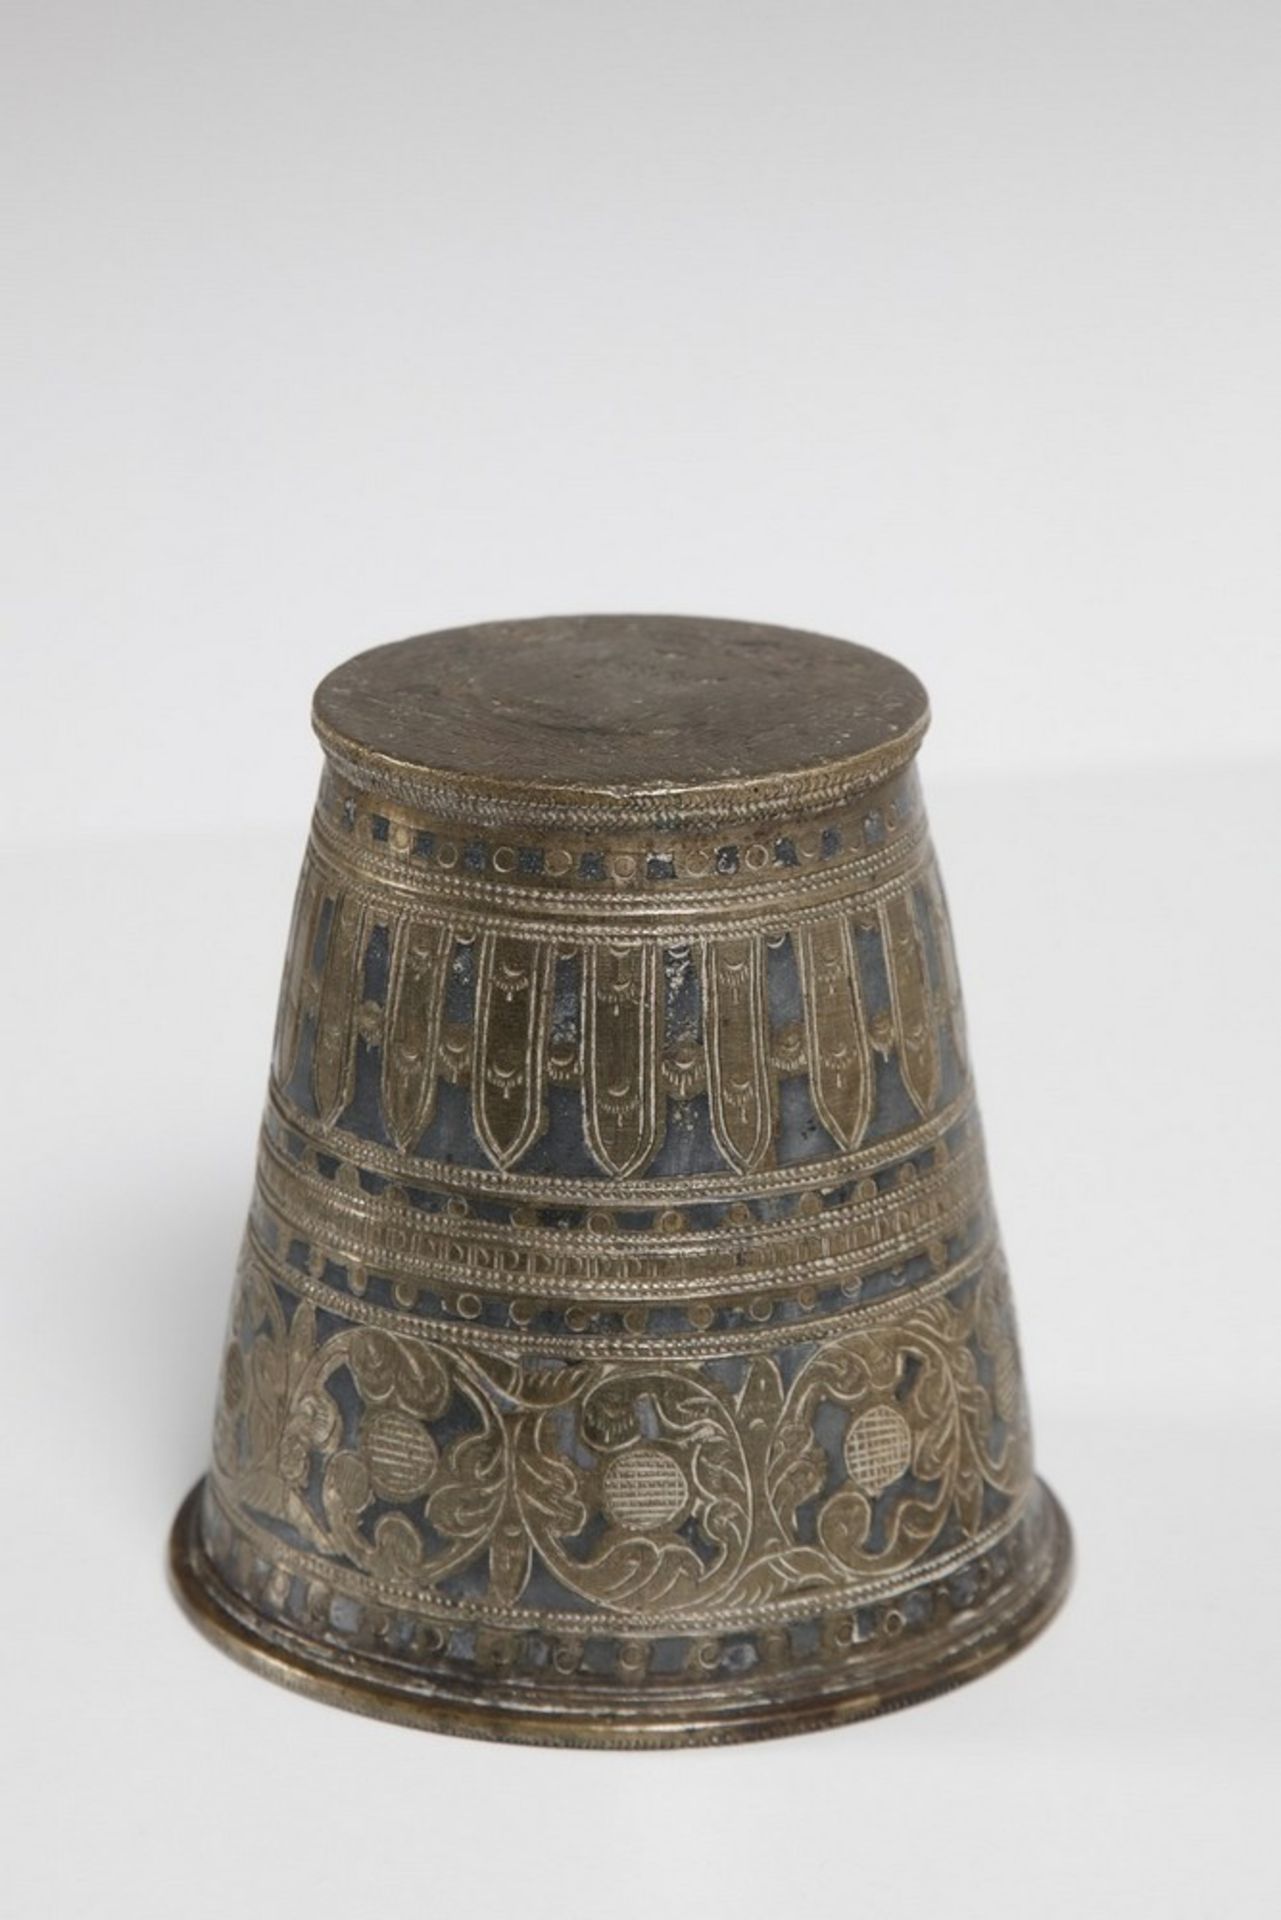 Arte Indiana A bronze nielloed cup decorated with floral engravings India, 18th century . - Image 2 of 3